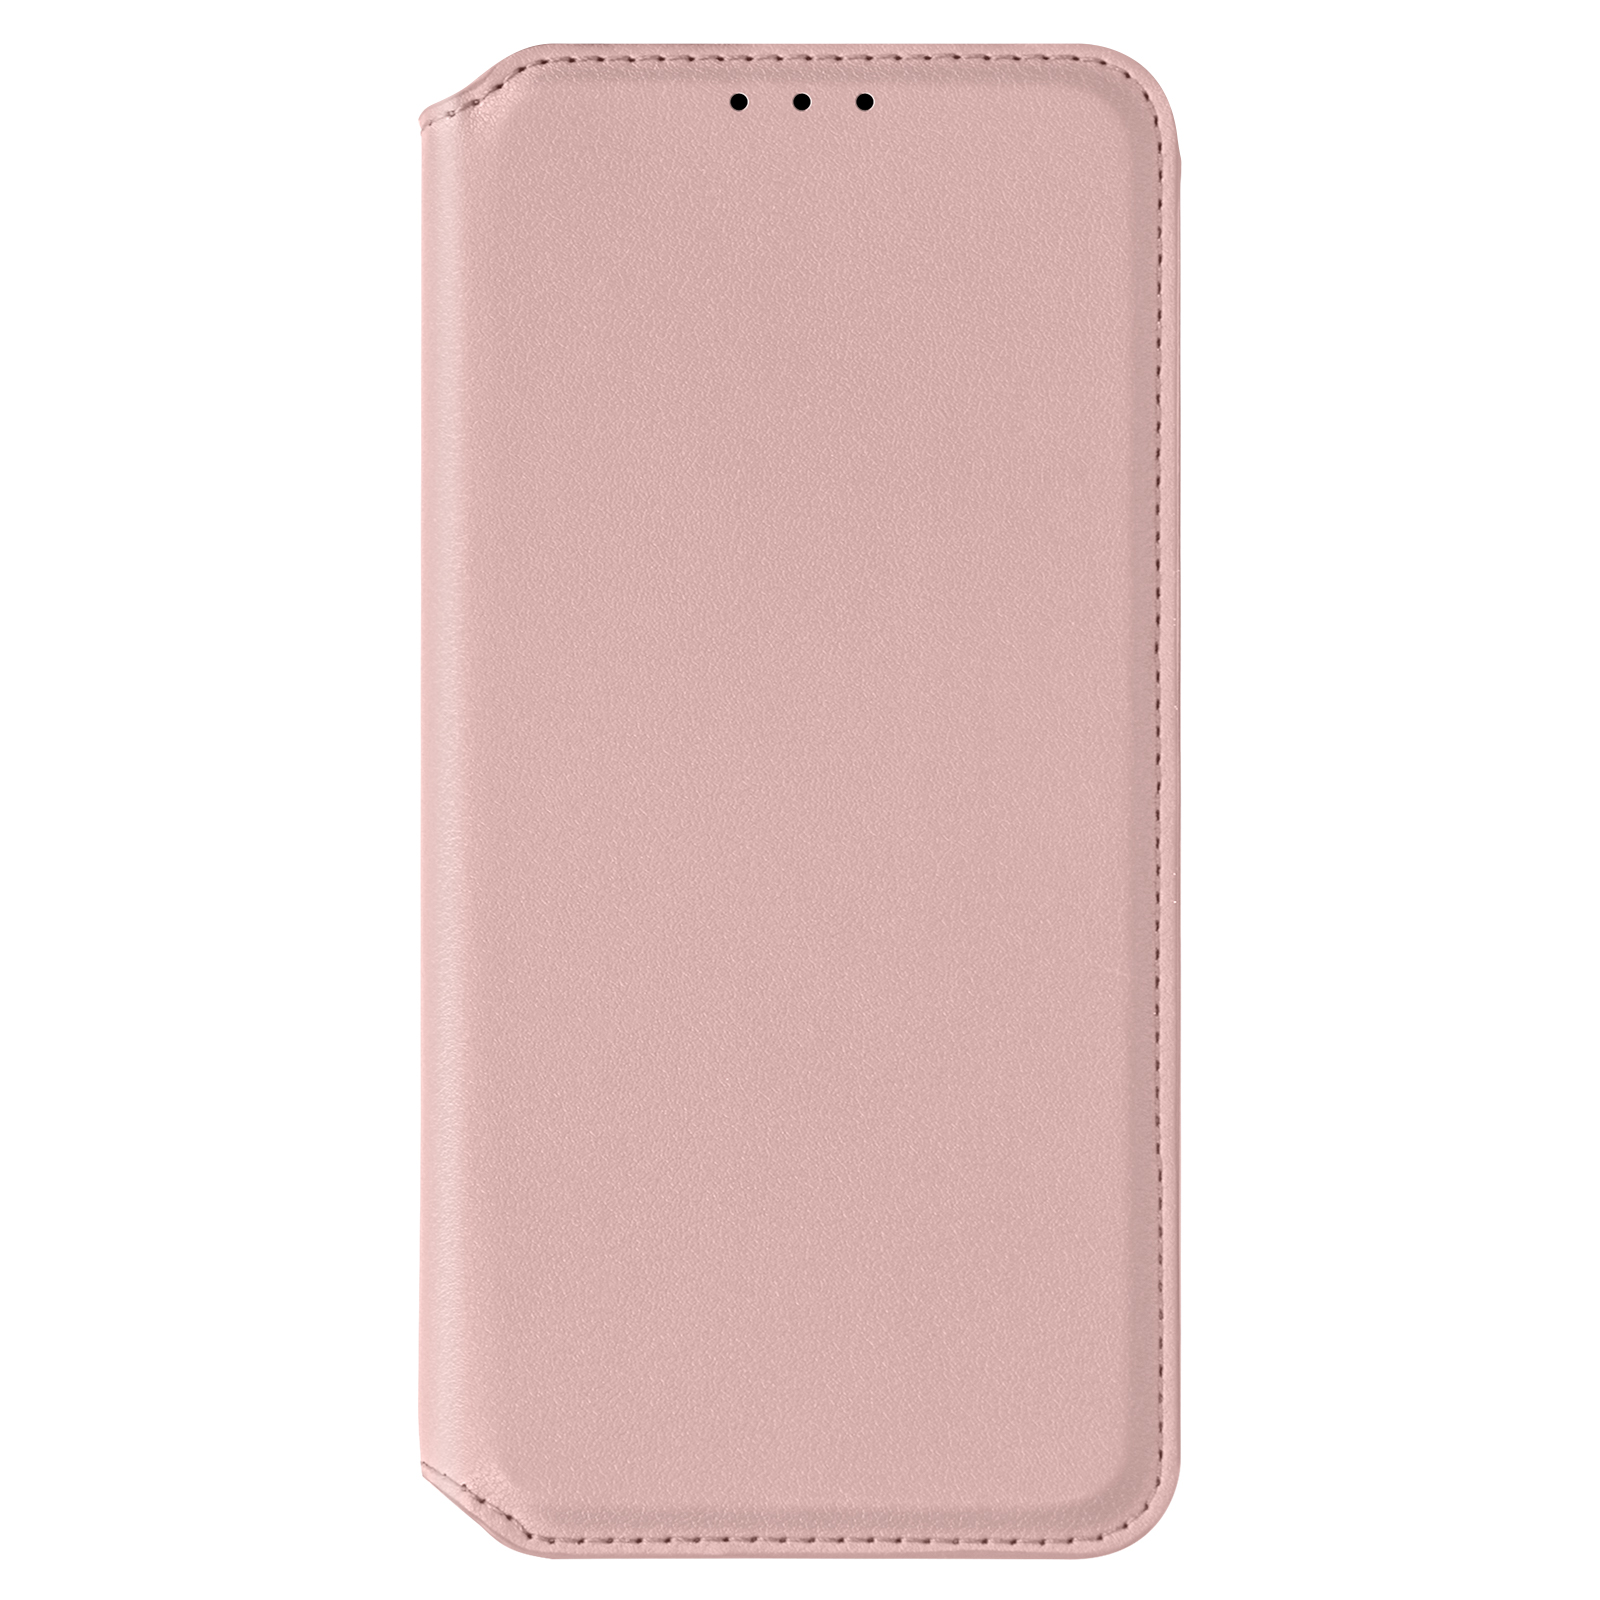 Rosegold Edition, Bookcover, Classic Honor, mit Backcover AVIZAR Honor X8, Magnetklappe Series,